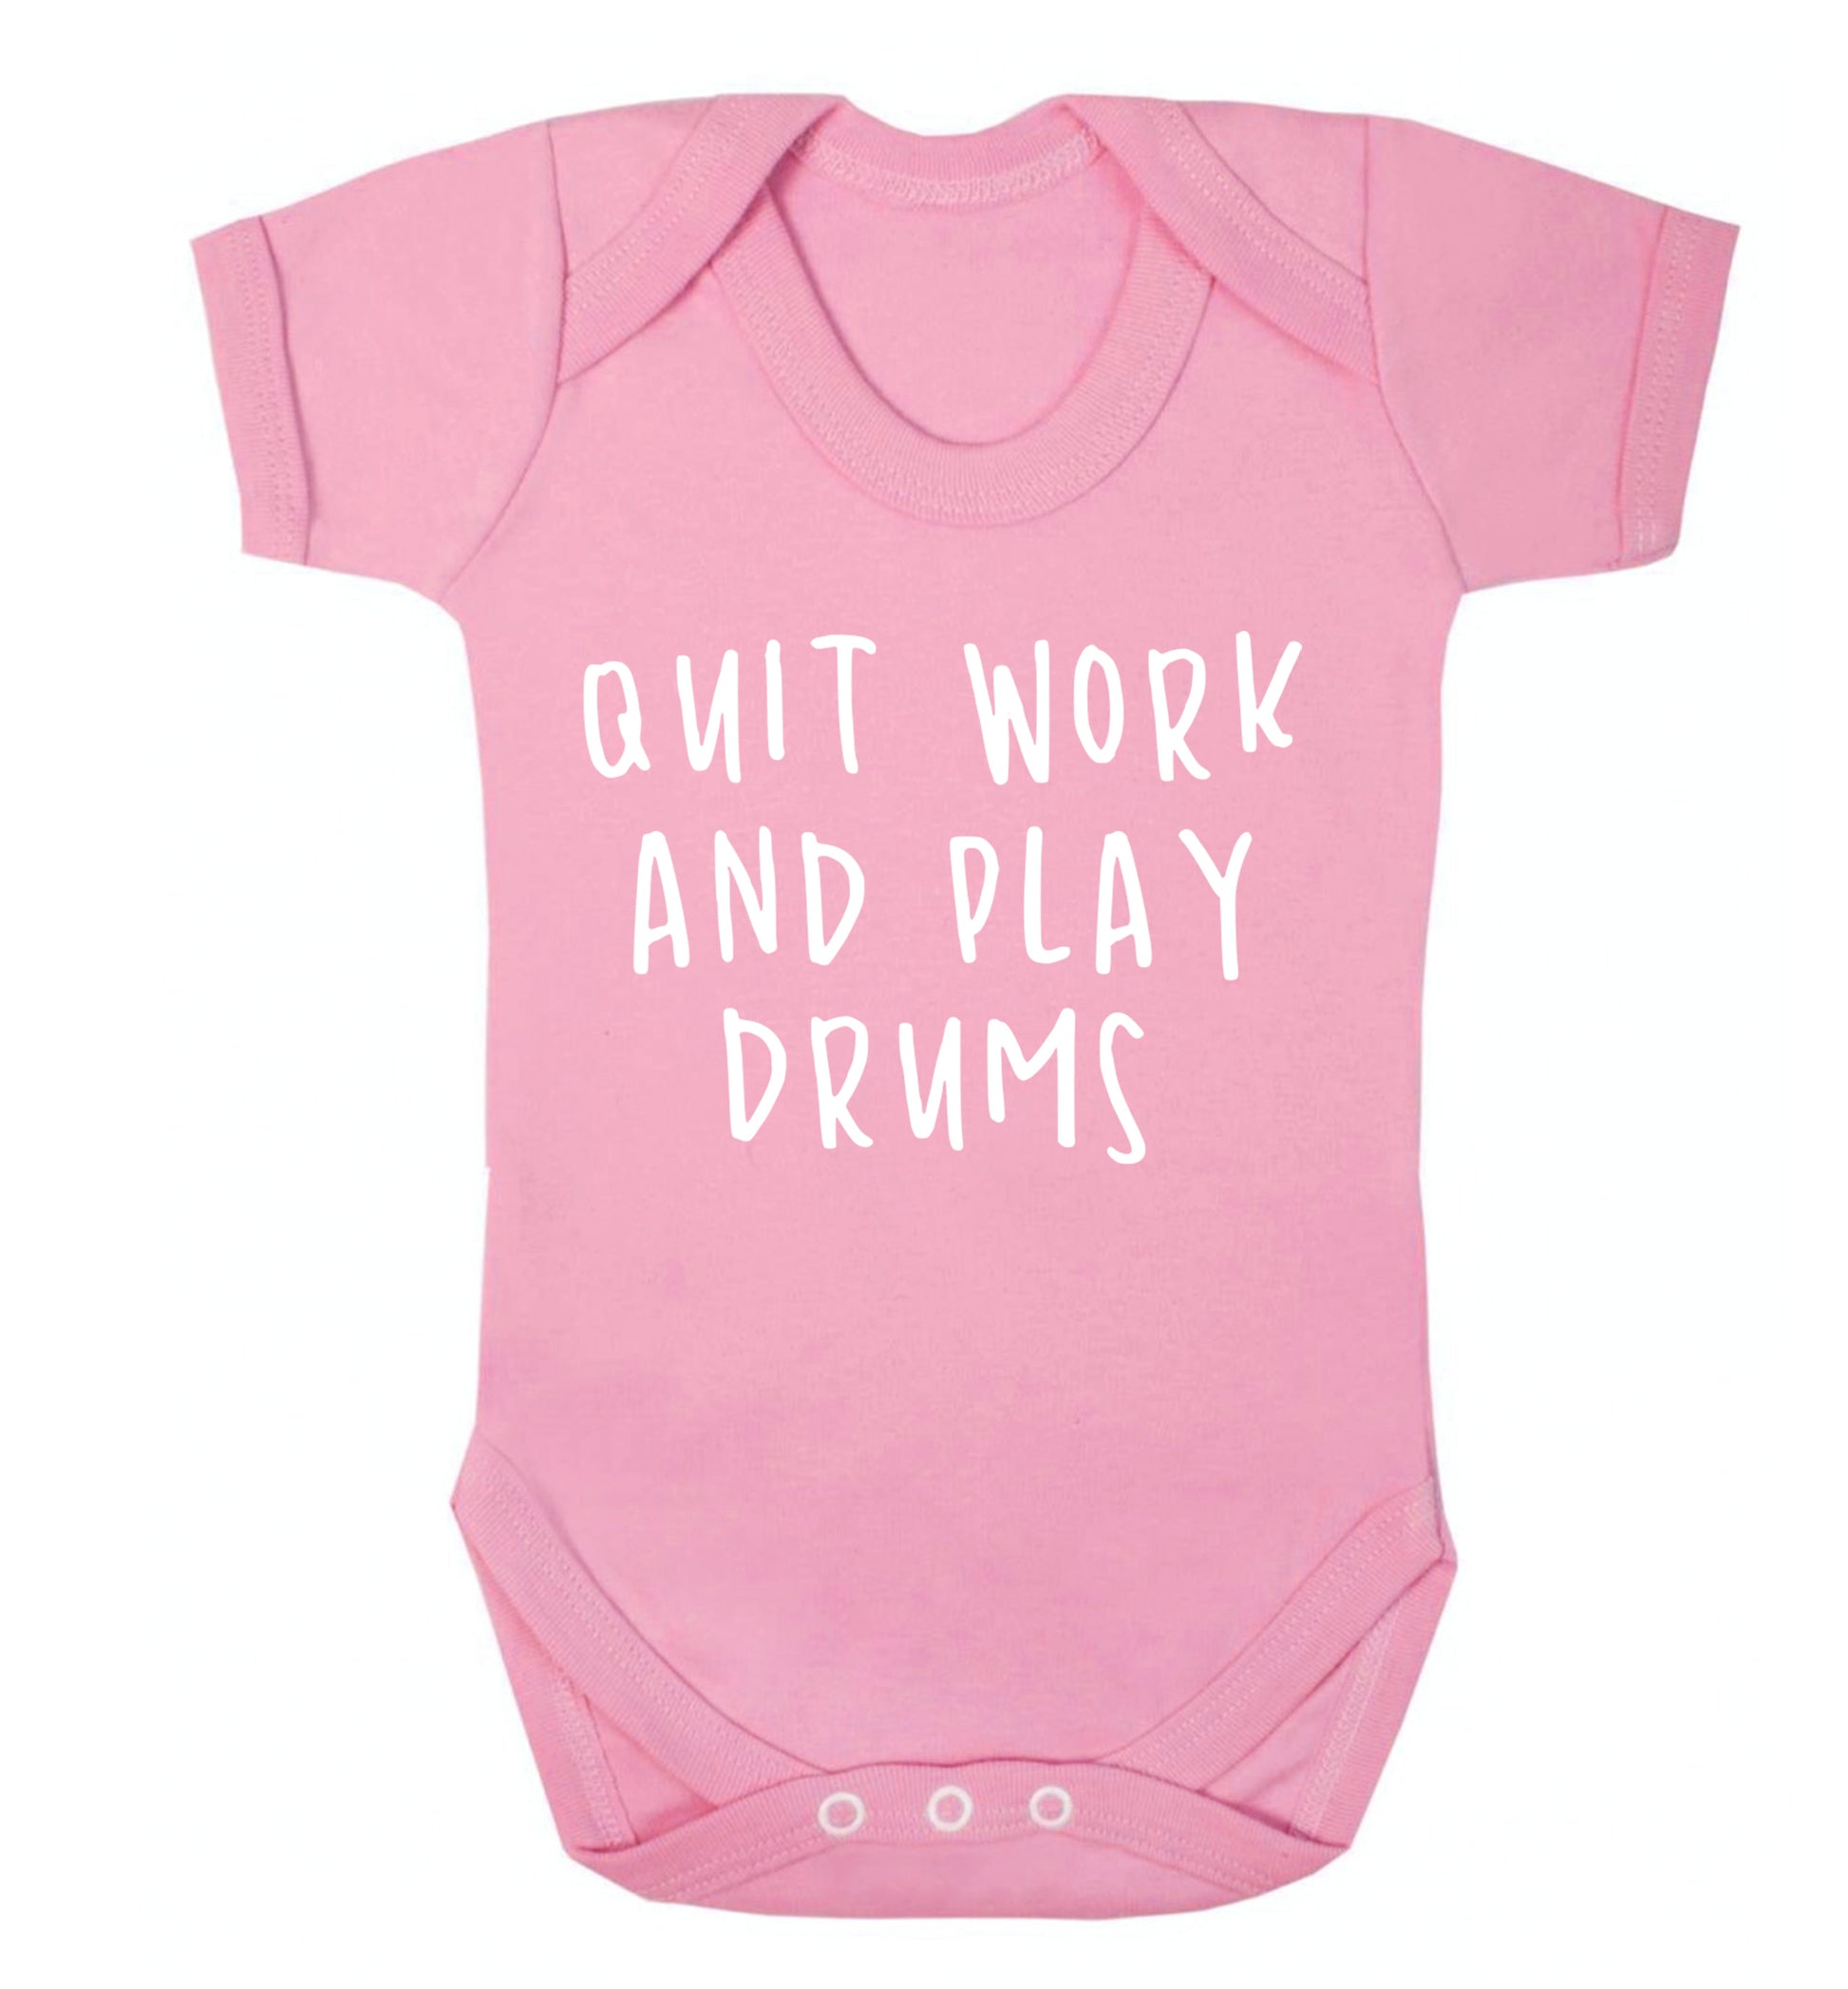 Quit work and play drums Baby Vest pale pink 18-24 months